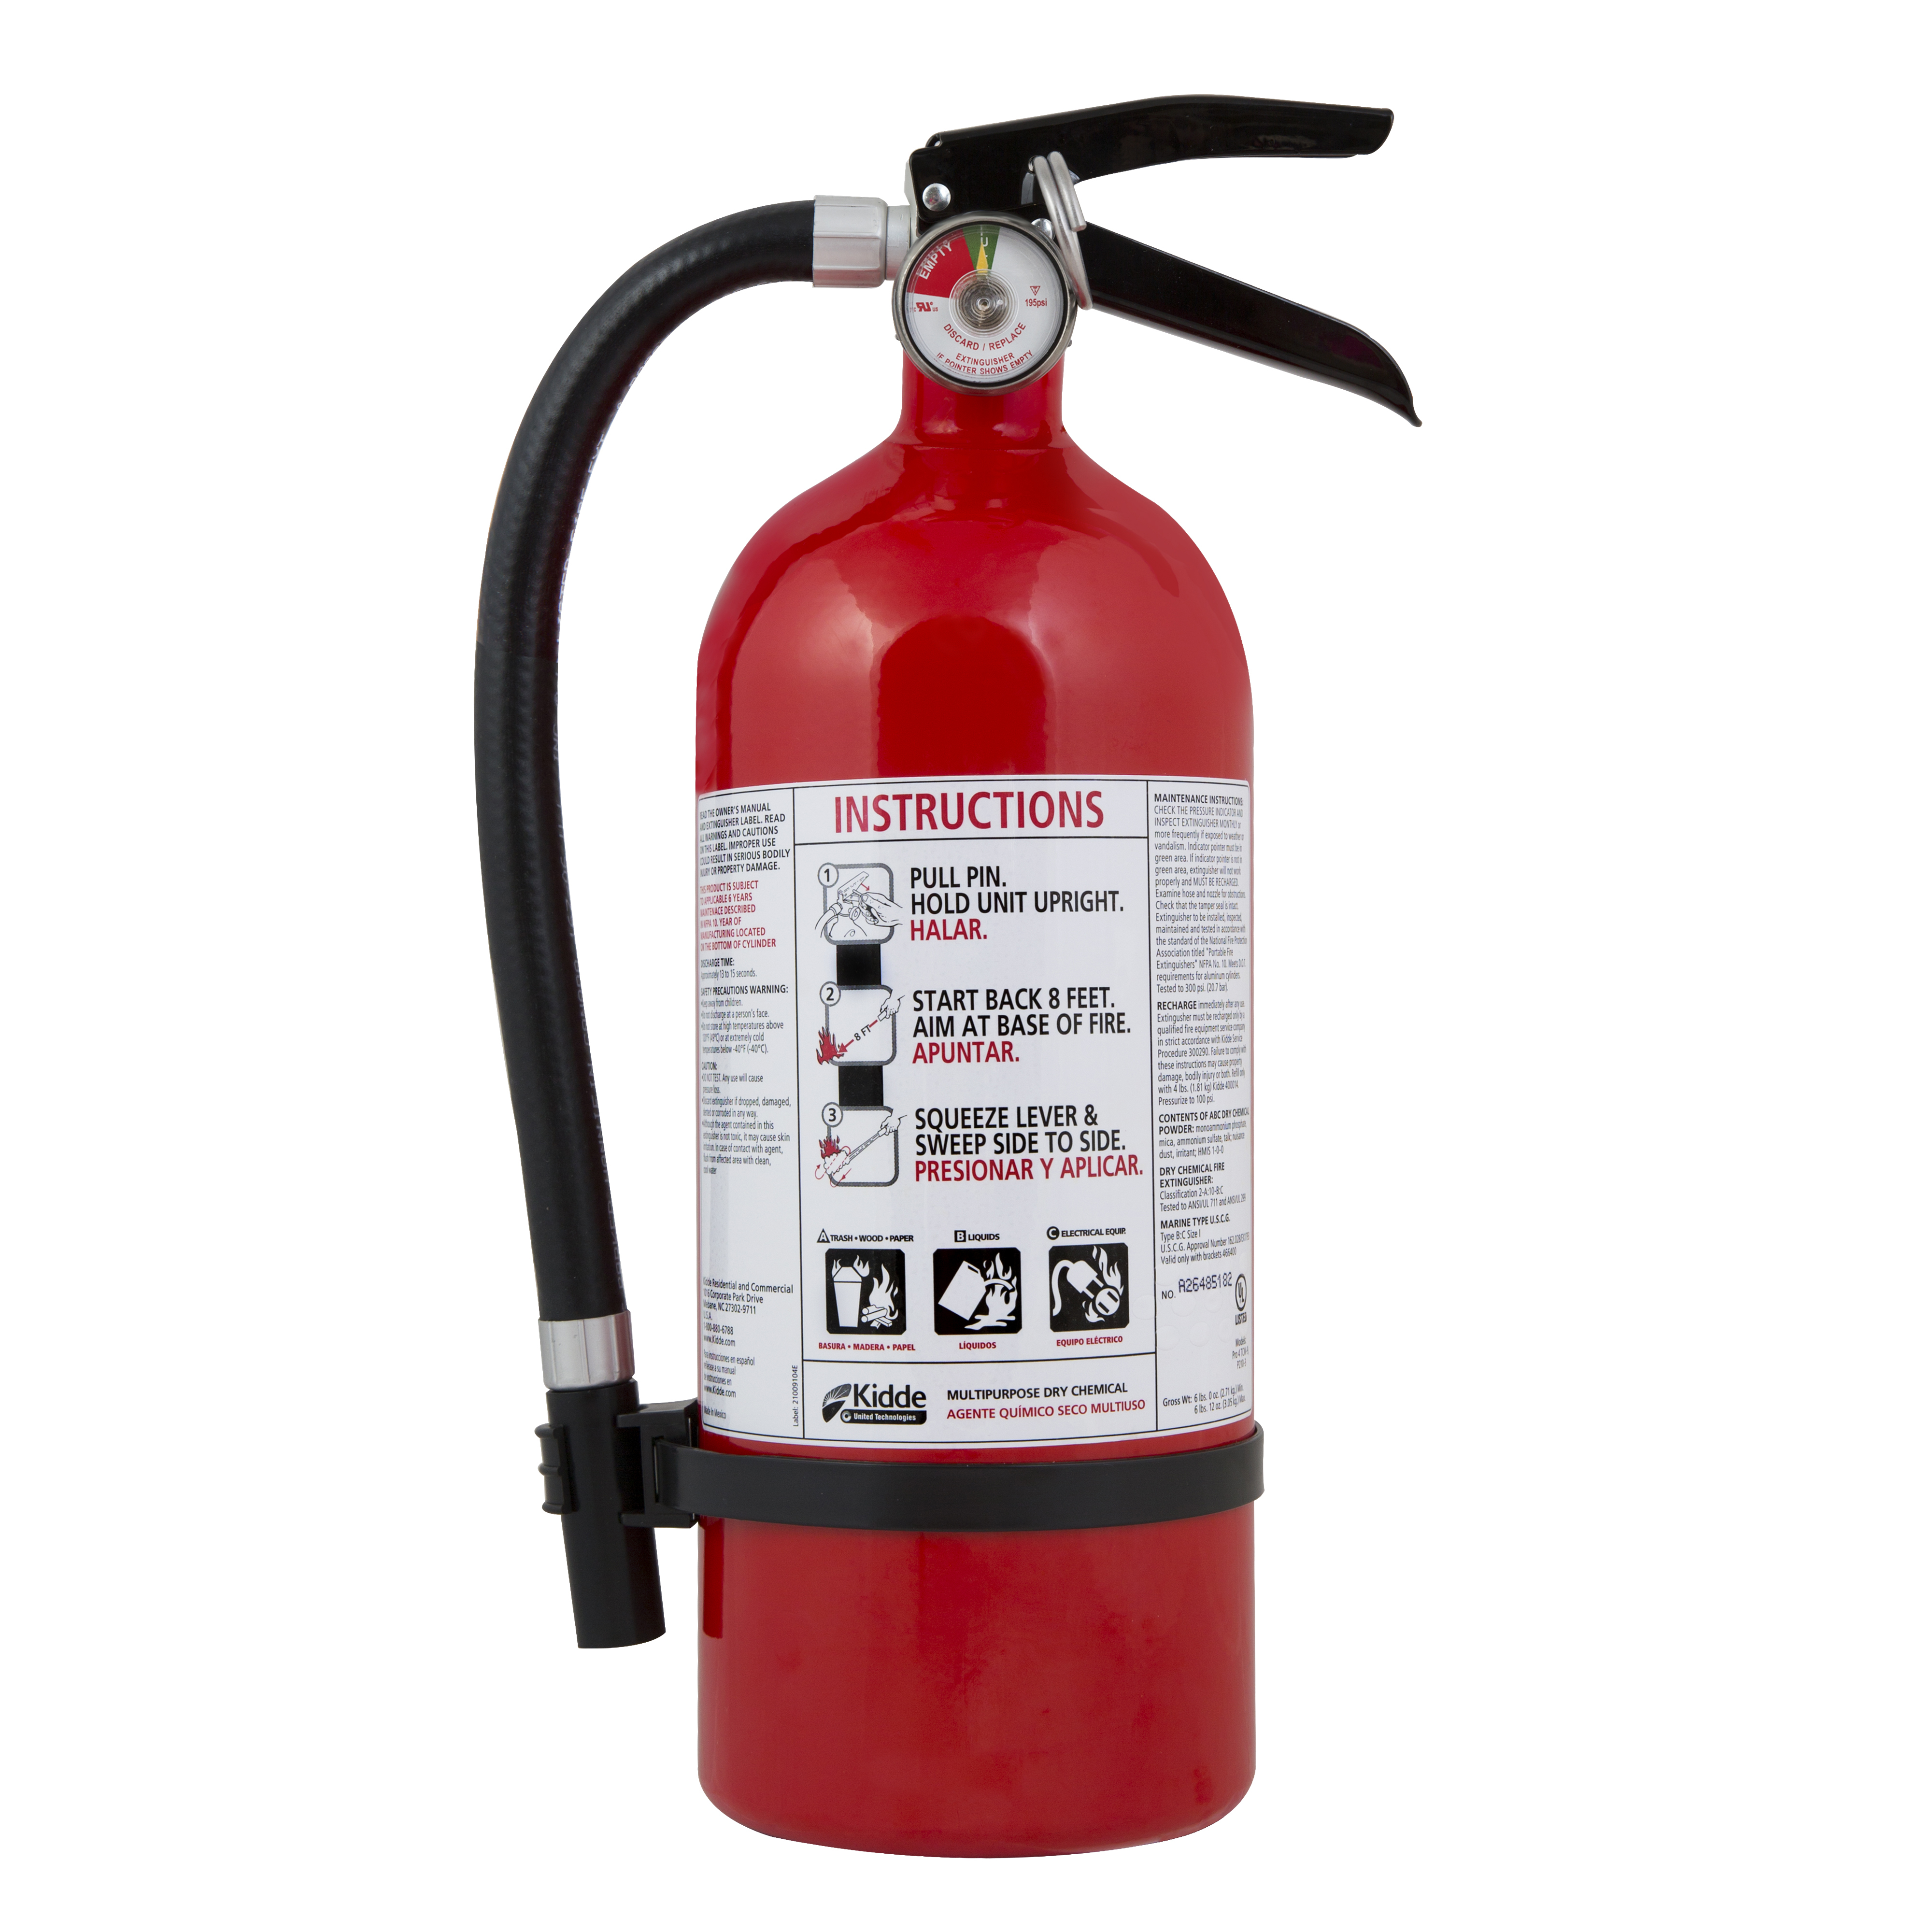 Kidde Fire Extinguisher UL Rated 2-A:10-B:C, Model KD143-210ABC - image 1 of 5